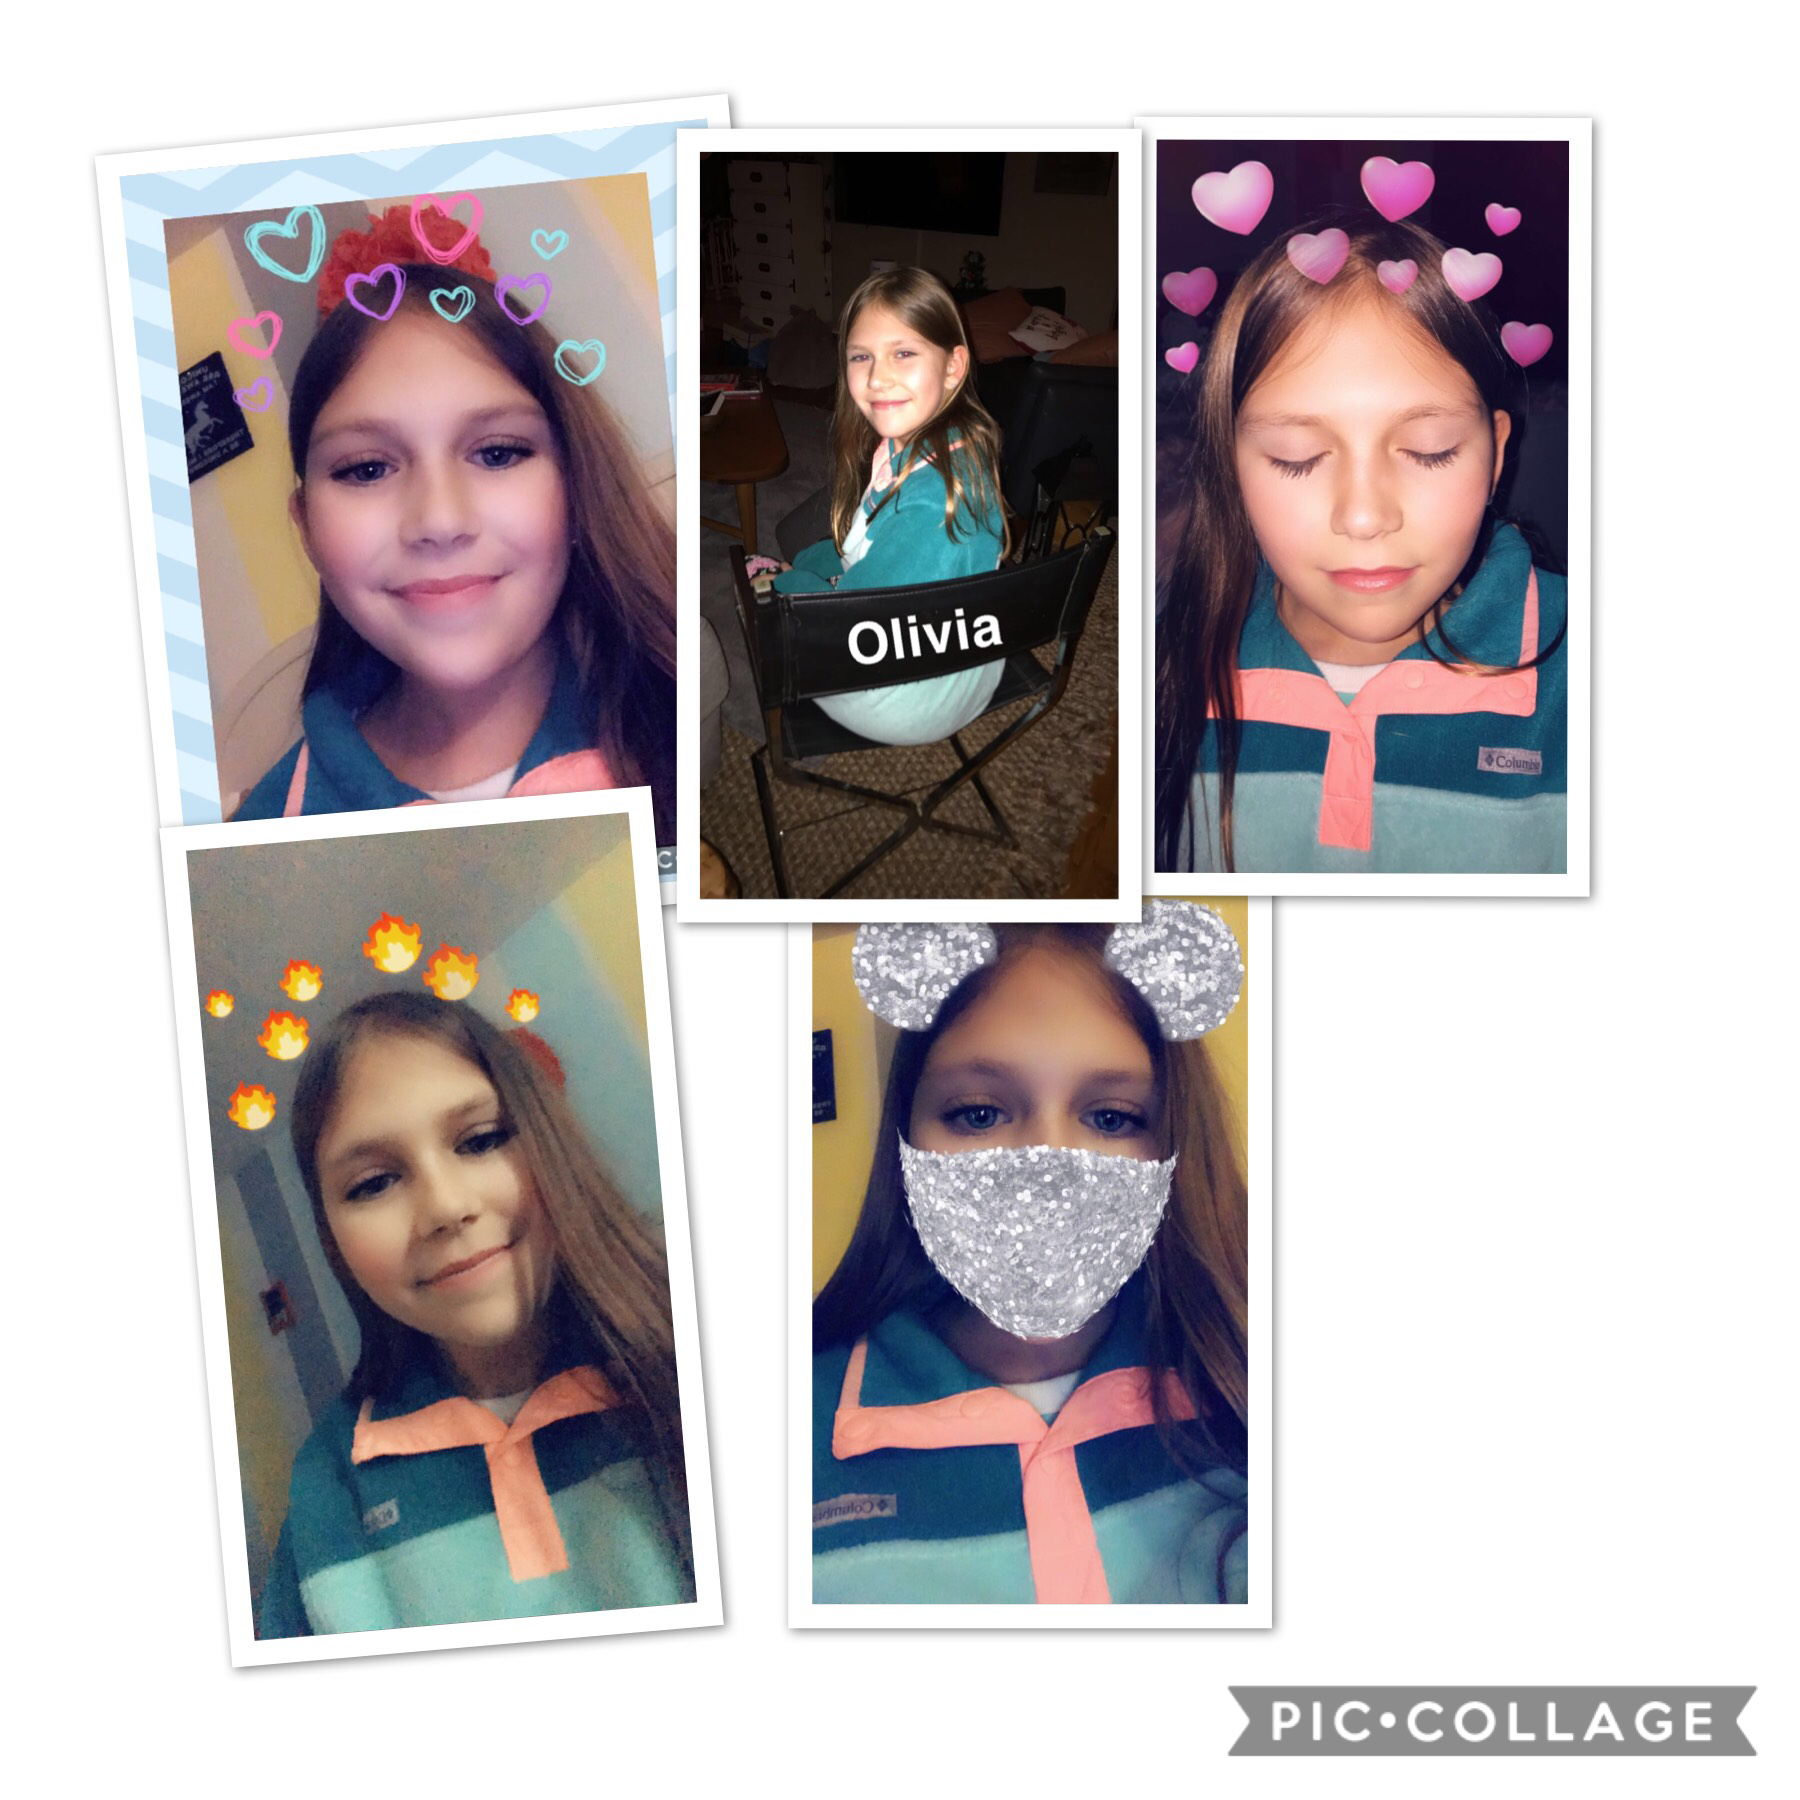 Snapchat filters! Comment down below your favorite picture😀